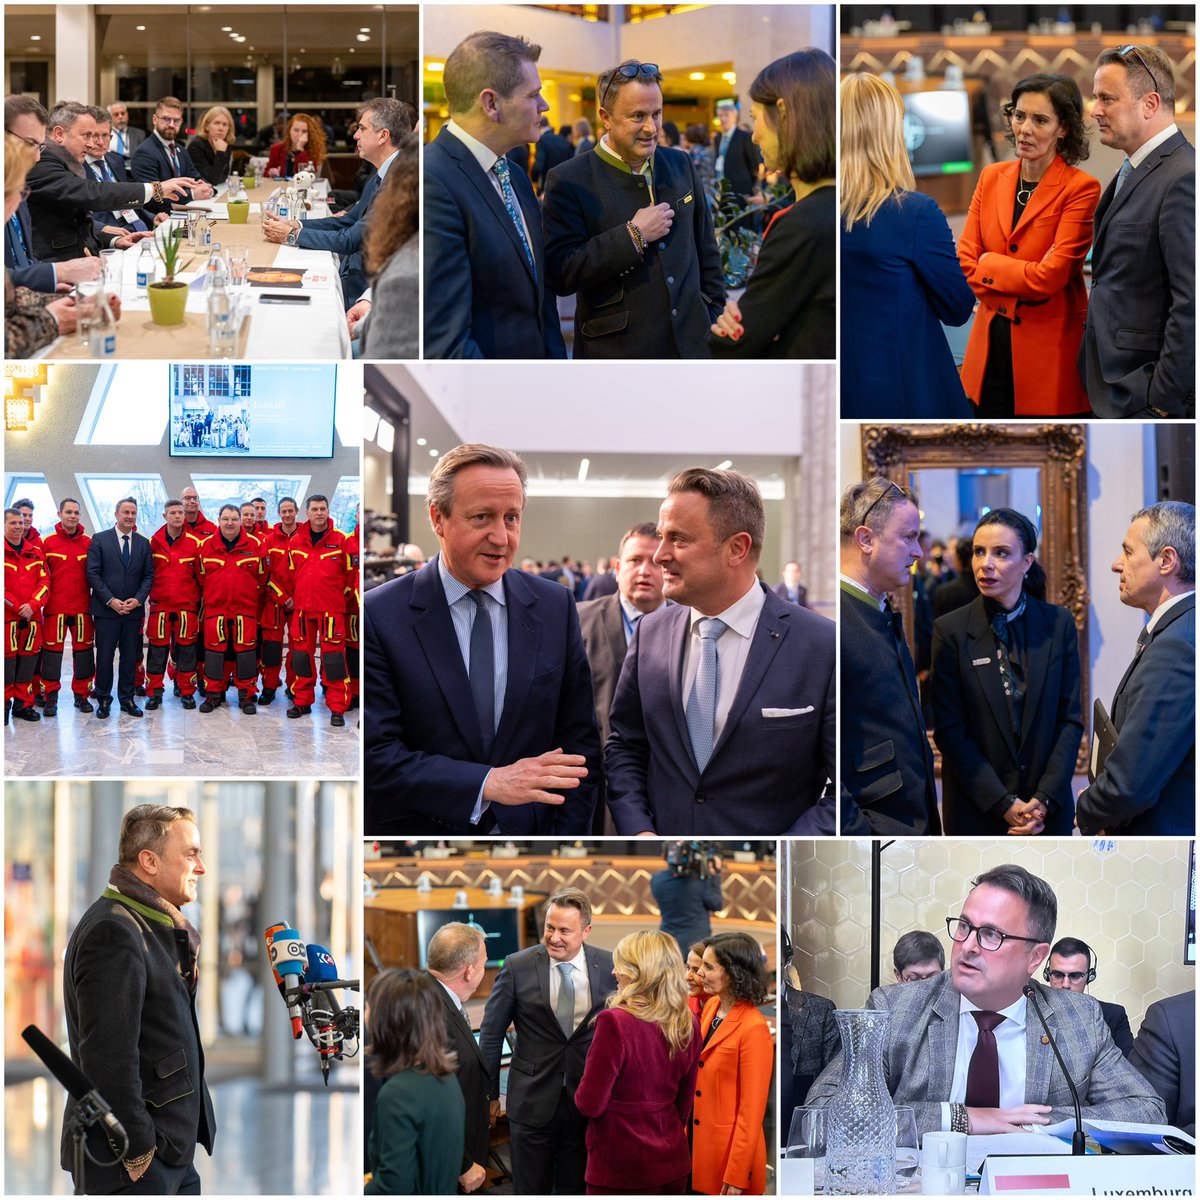 Very busy first week as Foreign Minister with meetings in Barcelona, Brussels & Skopje at #UfM, @NATO, @OSCE and bilaterals with many new counterparts Despite the unstable int’l environment, I’m looking forward to working with our partners to face our common challenges 🇱🇺🇪🇺🇺🇳